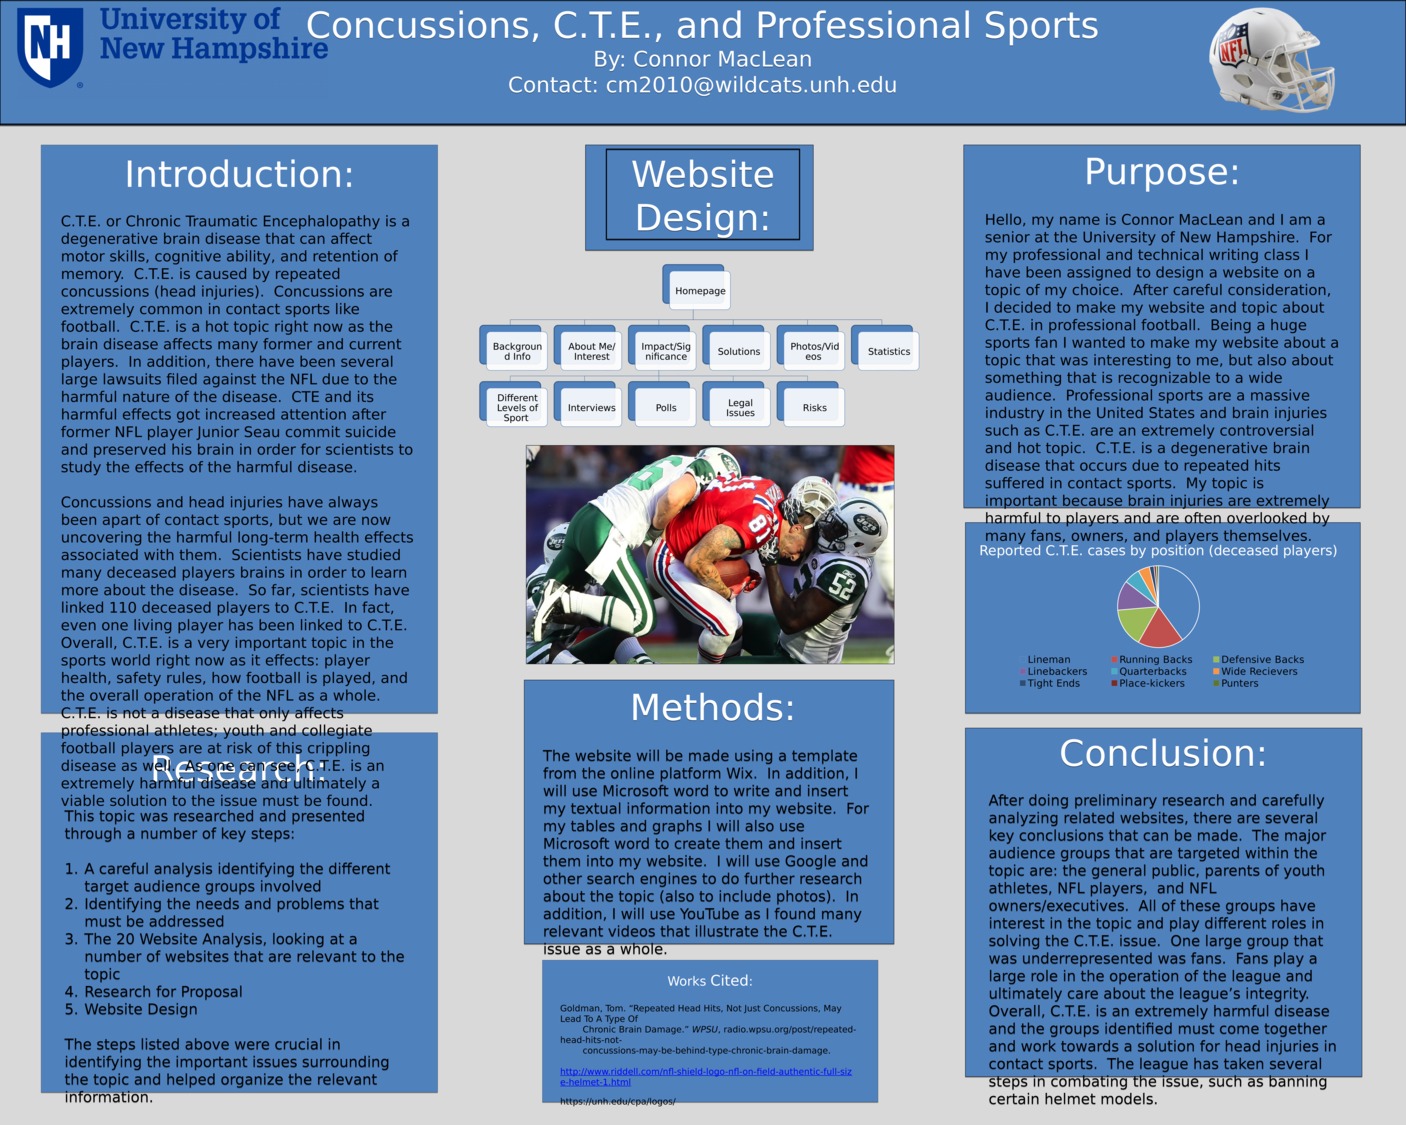 Concussions, C.T.E., And Professional Sports by cm2010